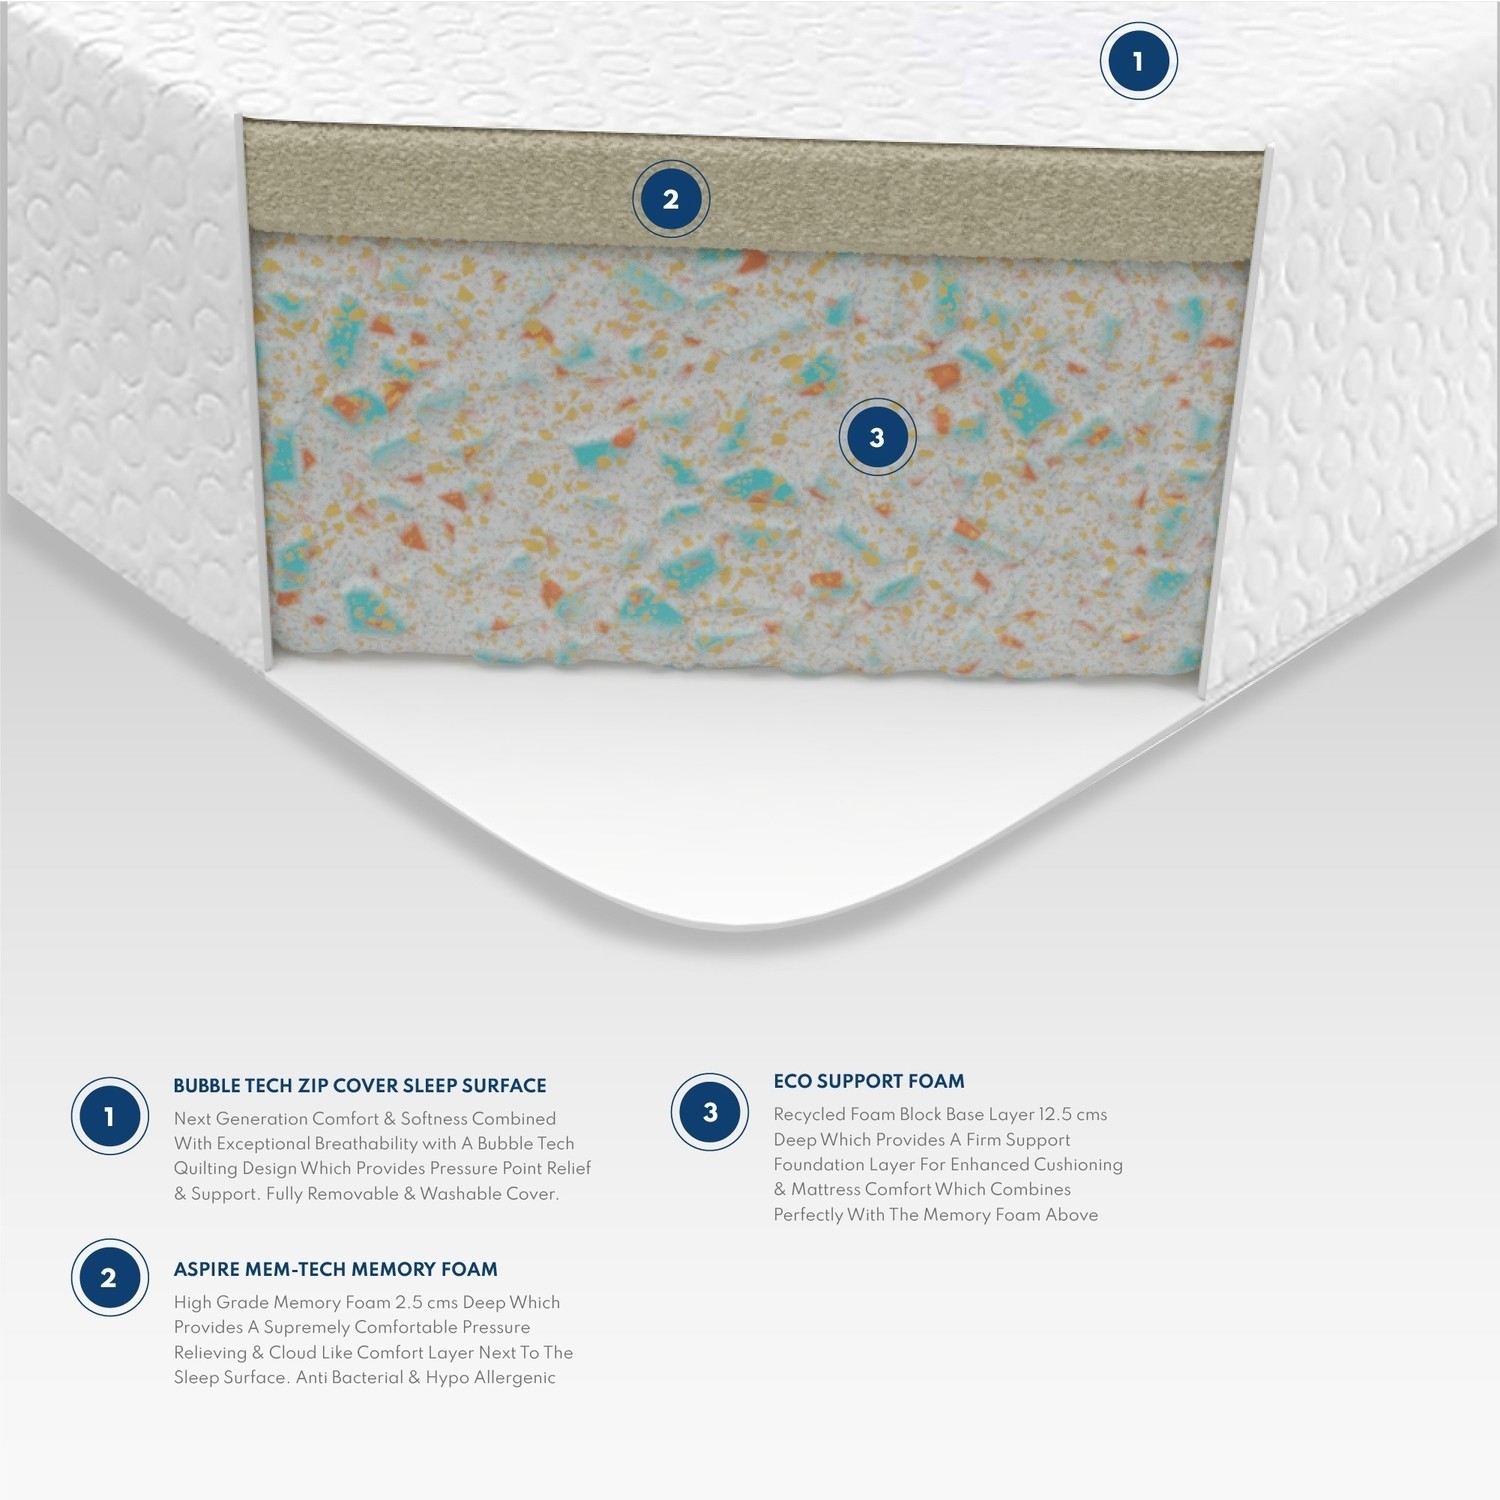 Read more about Double memory foam rolled hypoallergenic mattress with removable cover aspire